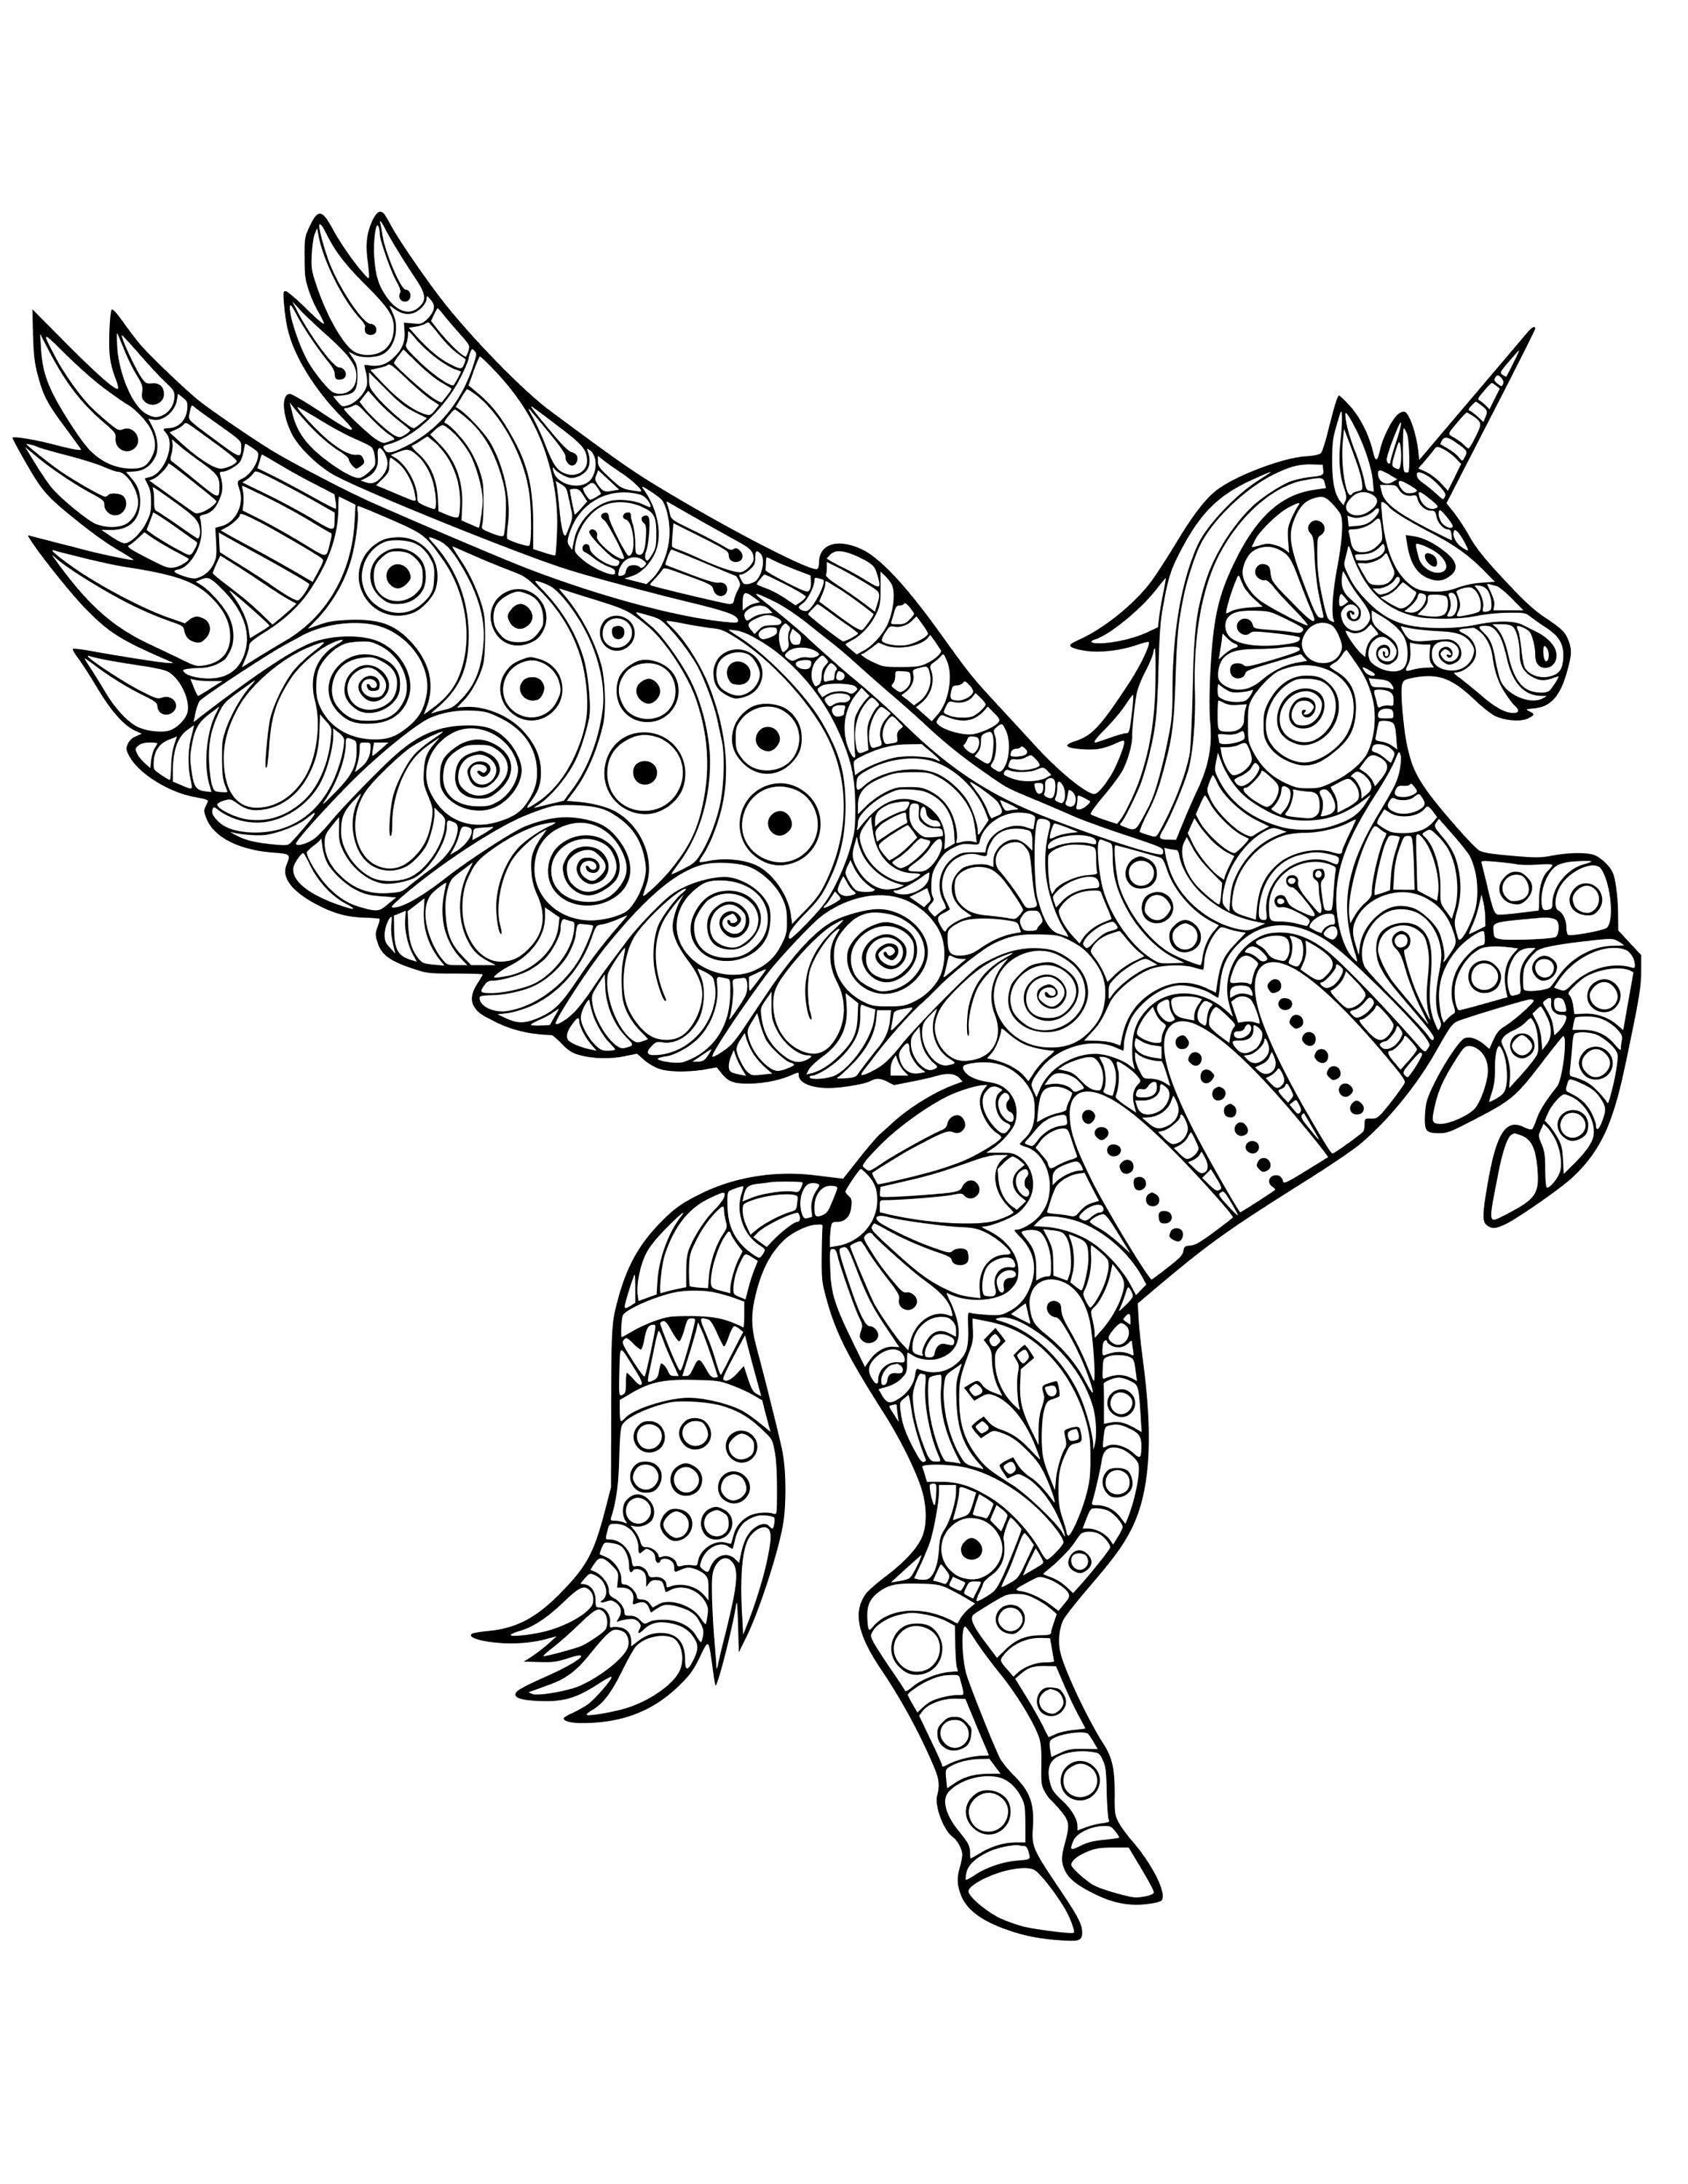 Zentangle pegasus unicorn coloring page cricut pattern silhouette variety of file types